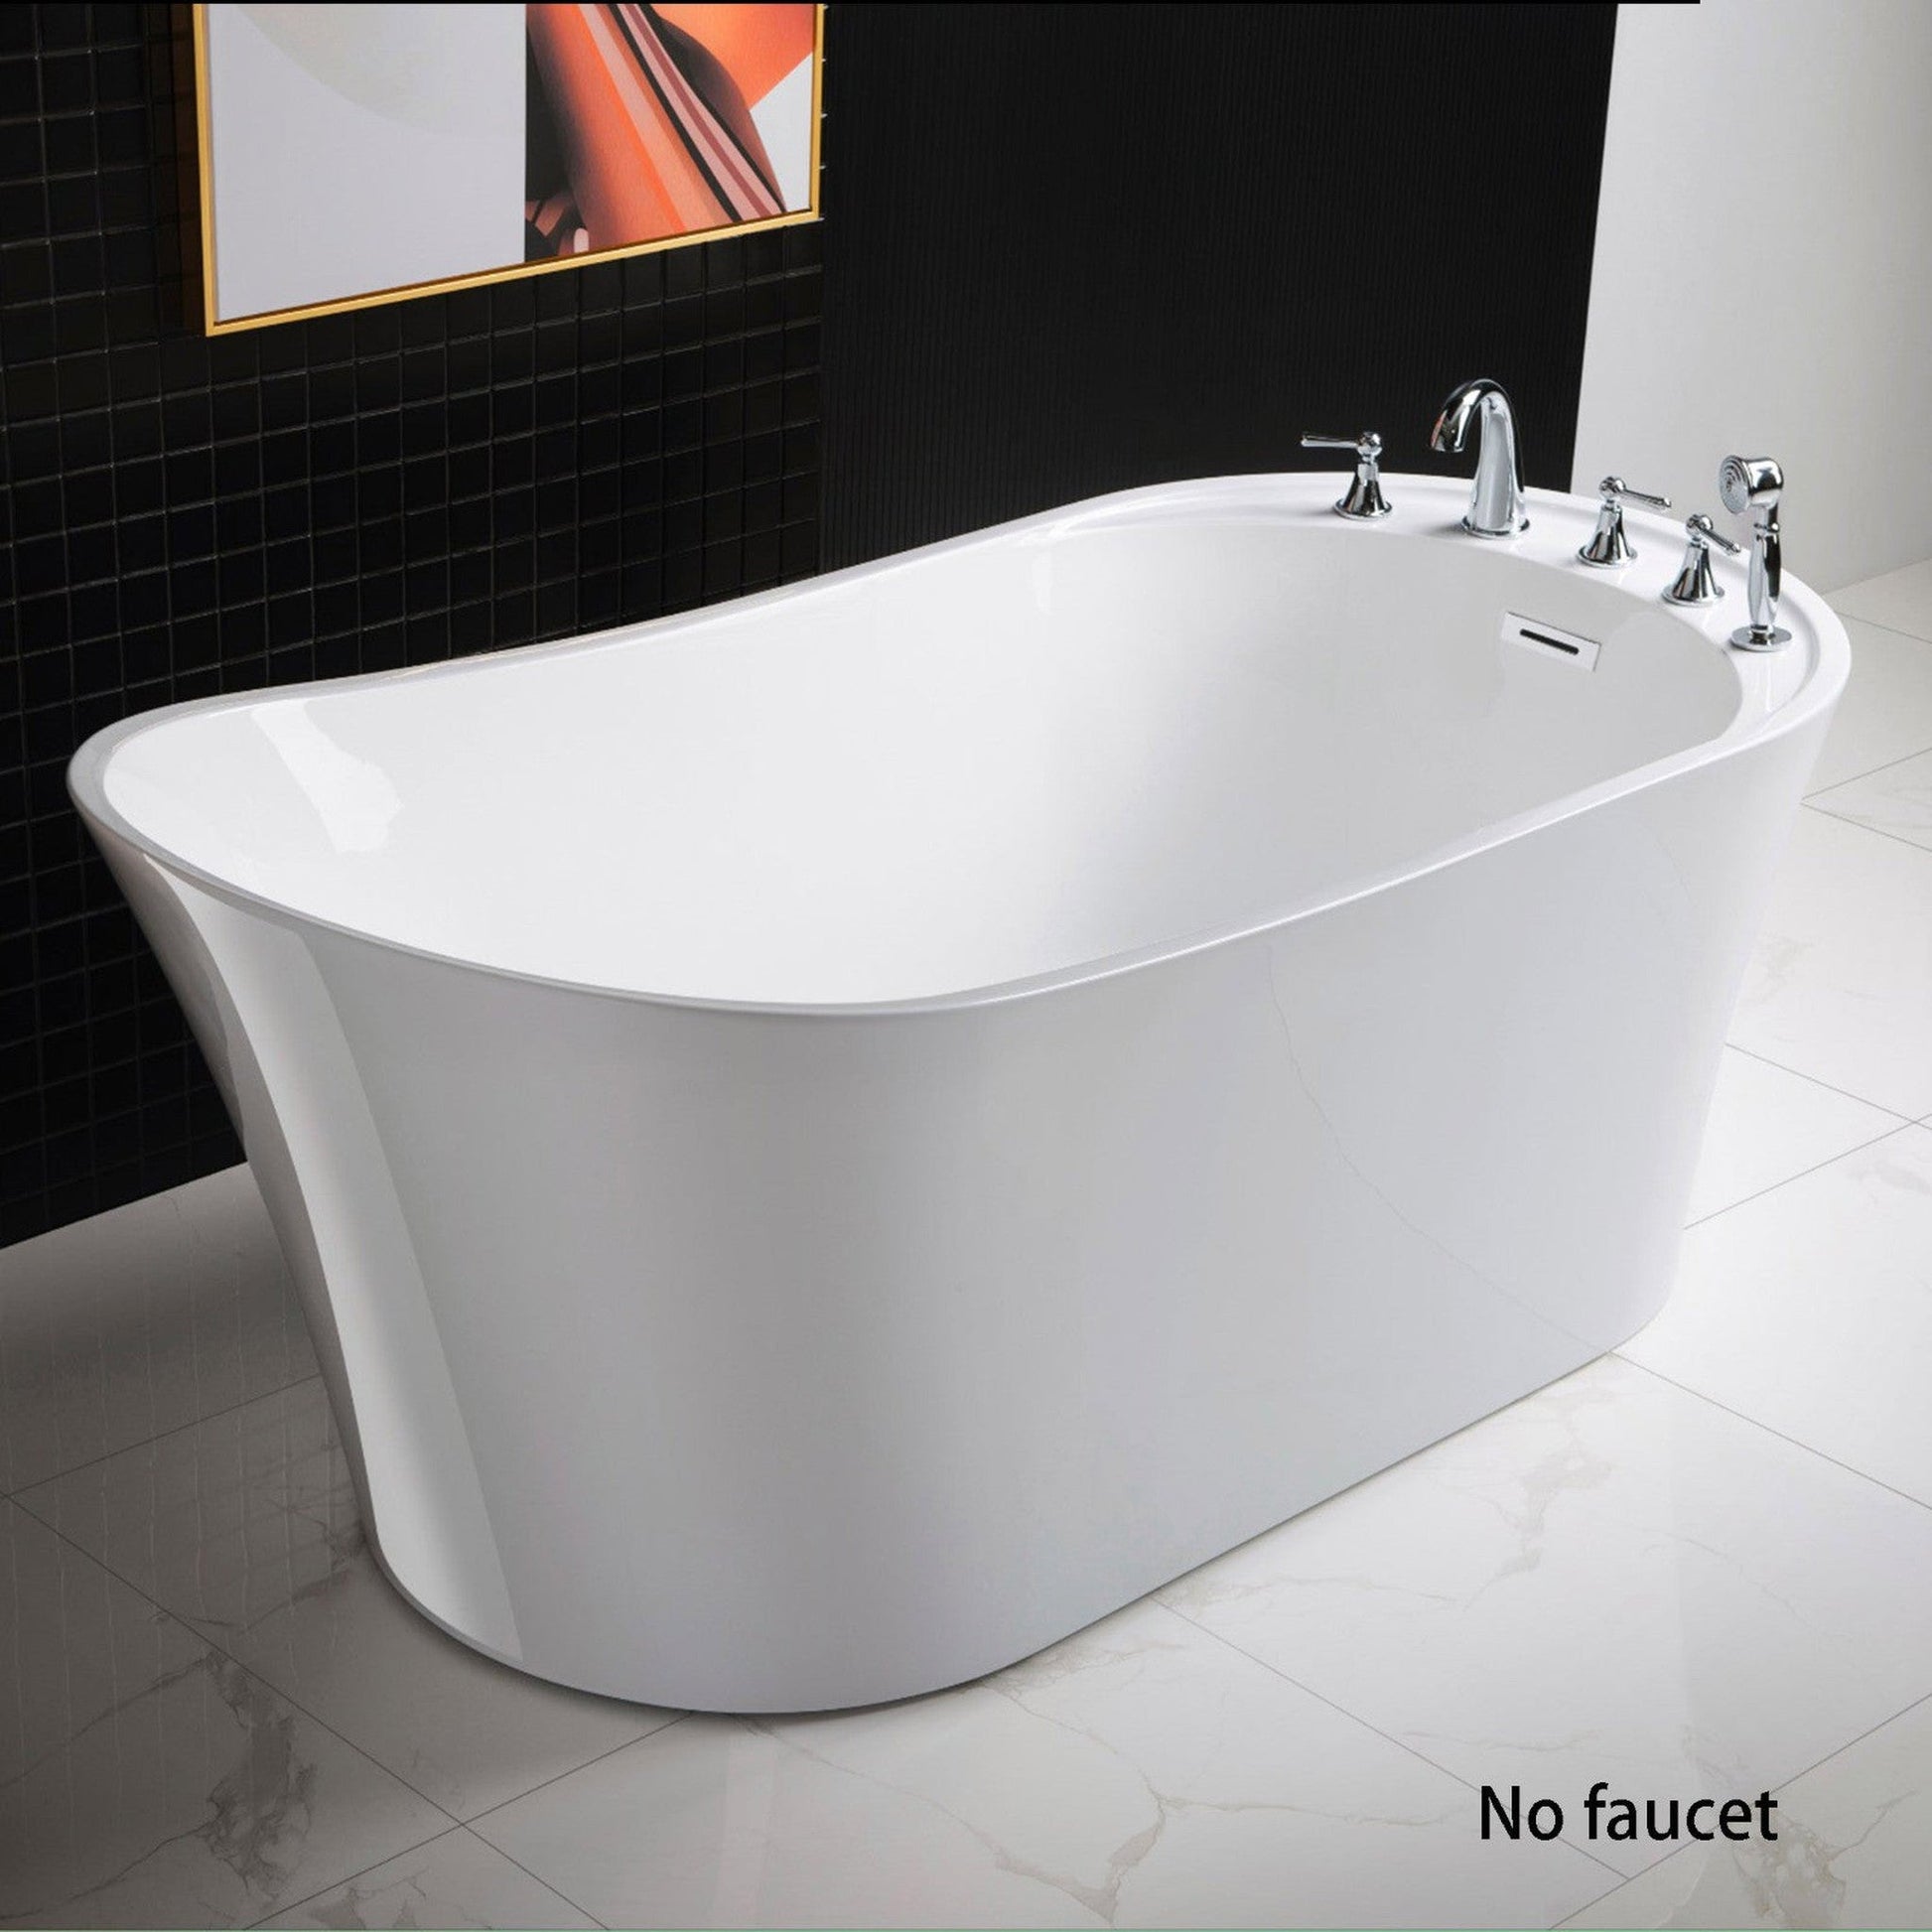 WoodBridge B0083 59" White Acrylic Freestanding Soaking Bathtub With Brushed Nickel Drain, Overflow, F0022 Tub Filler and Caddy Tray